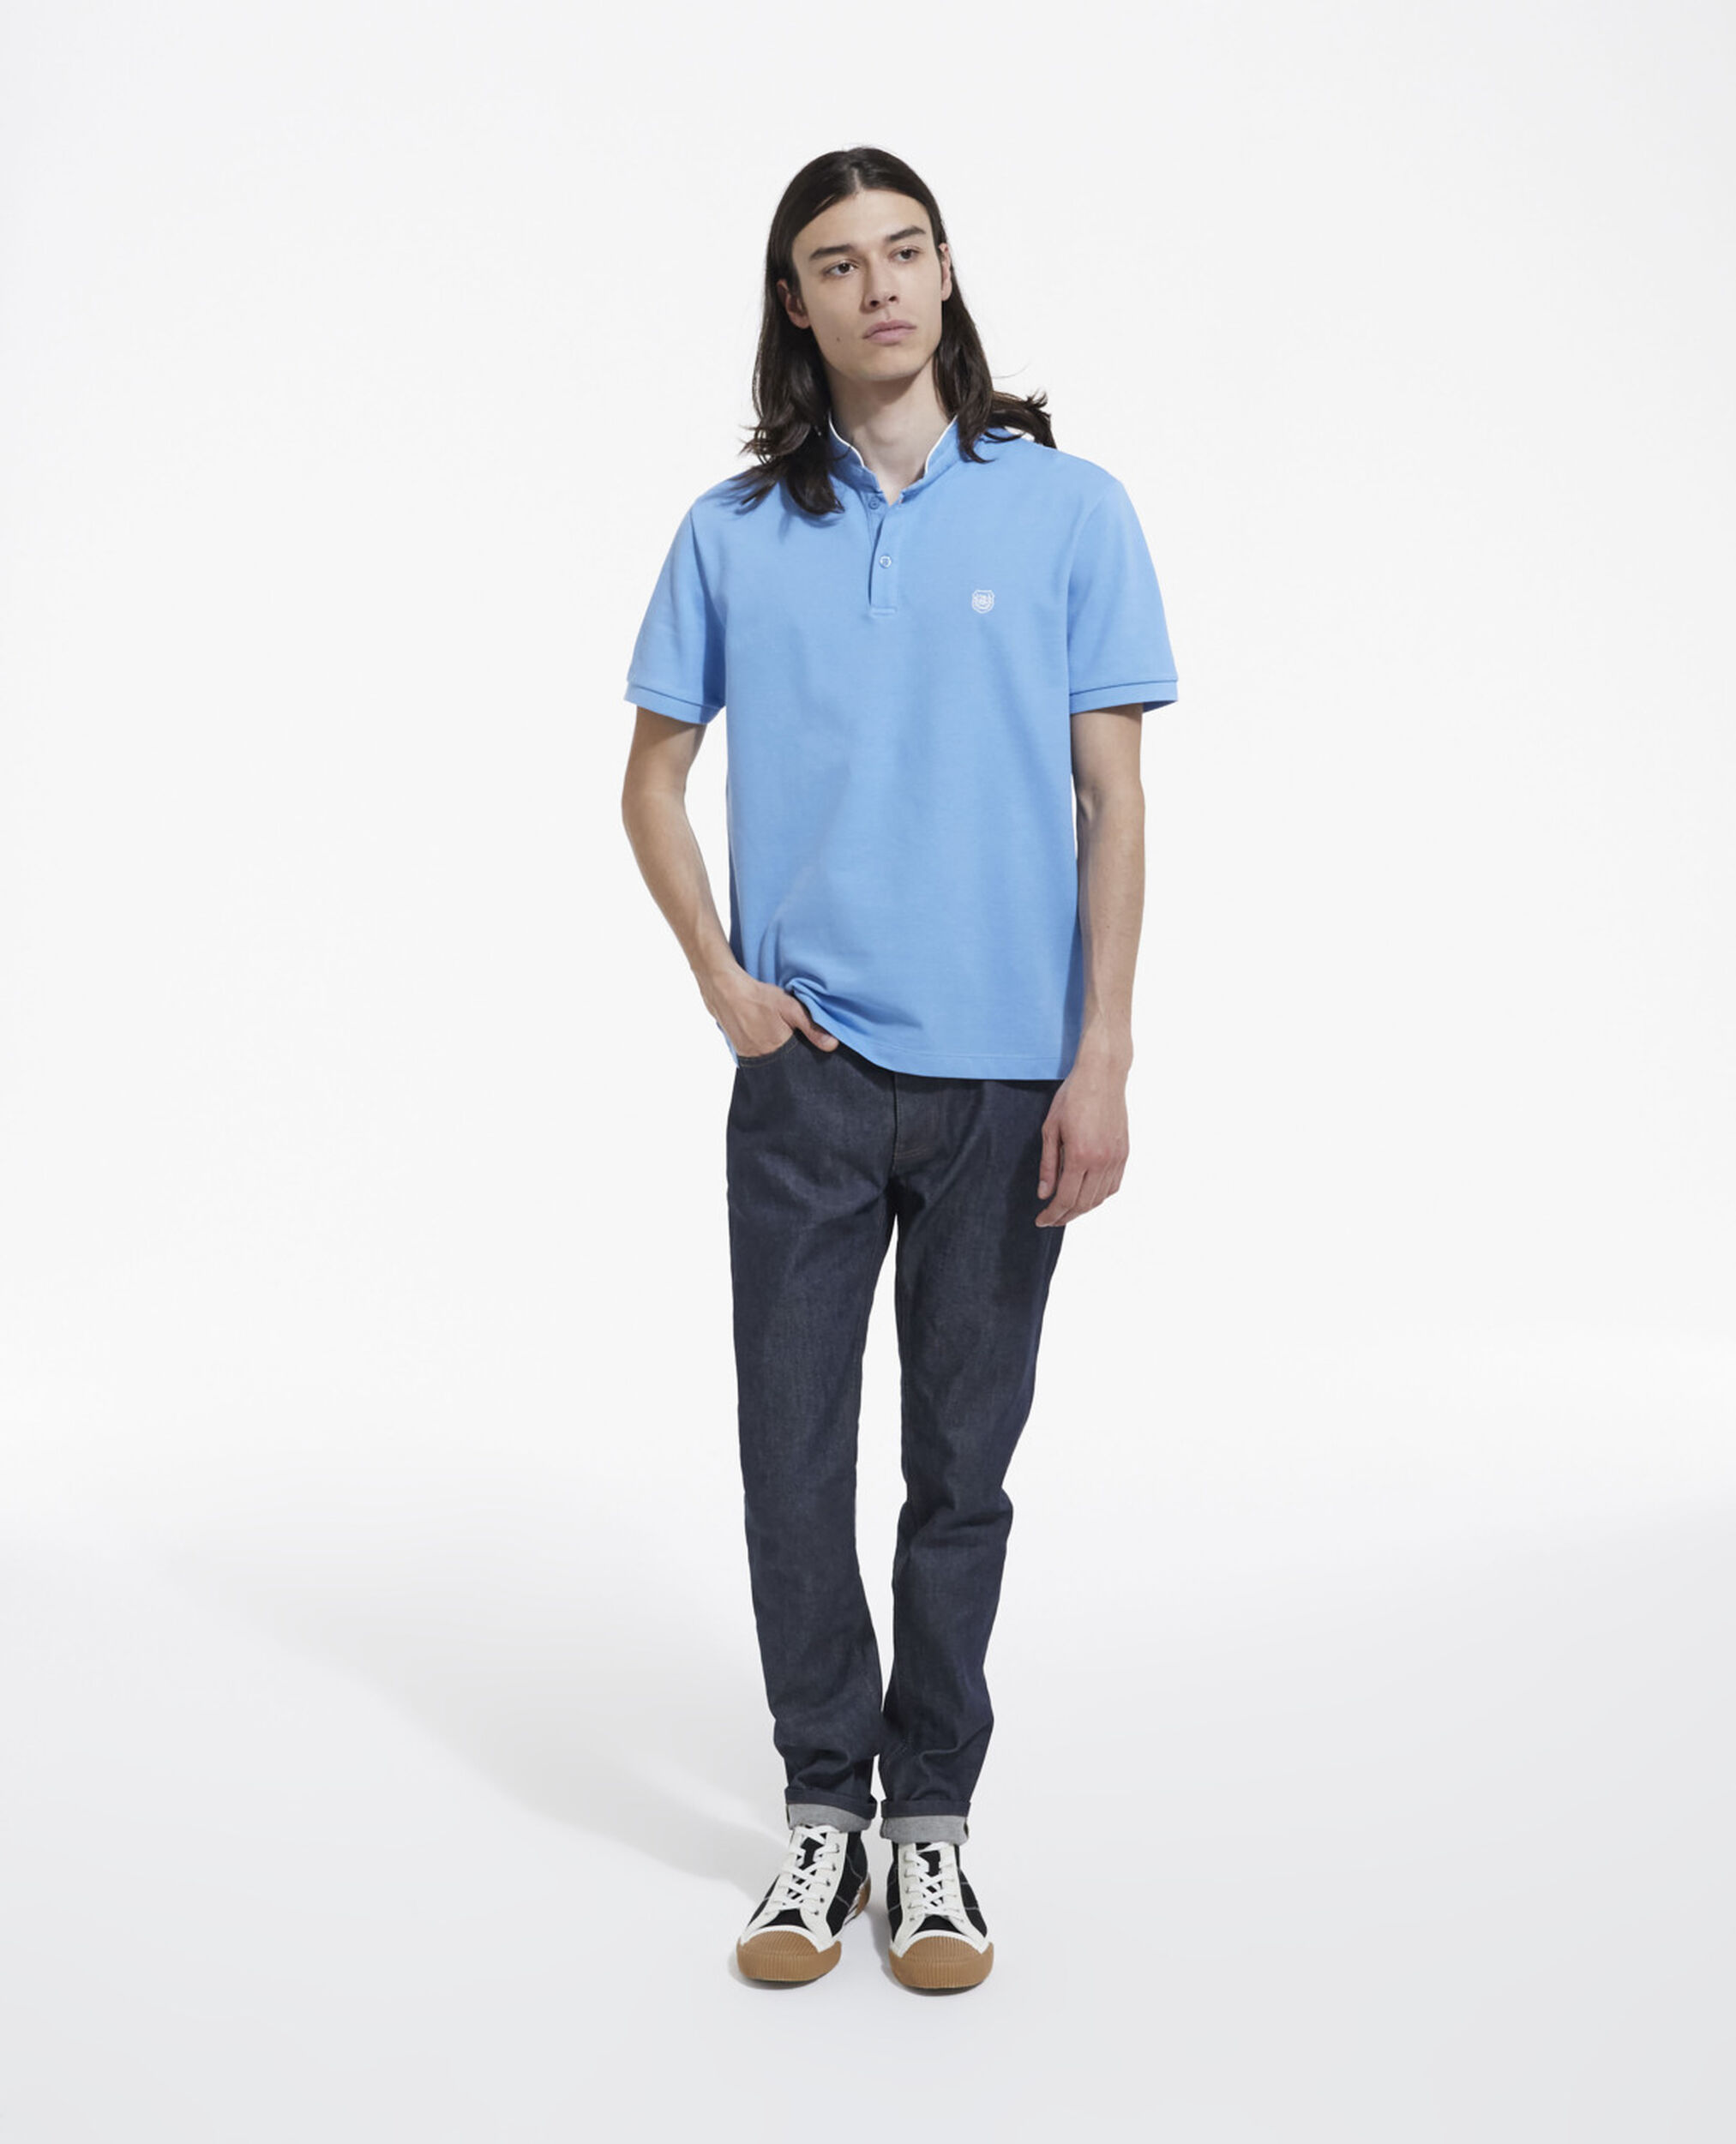 Embroidered blue polo w/ buttoned officer collar, BLUE / WHITE, hi-res image number null